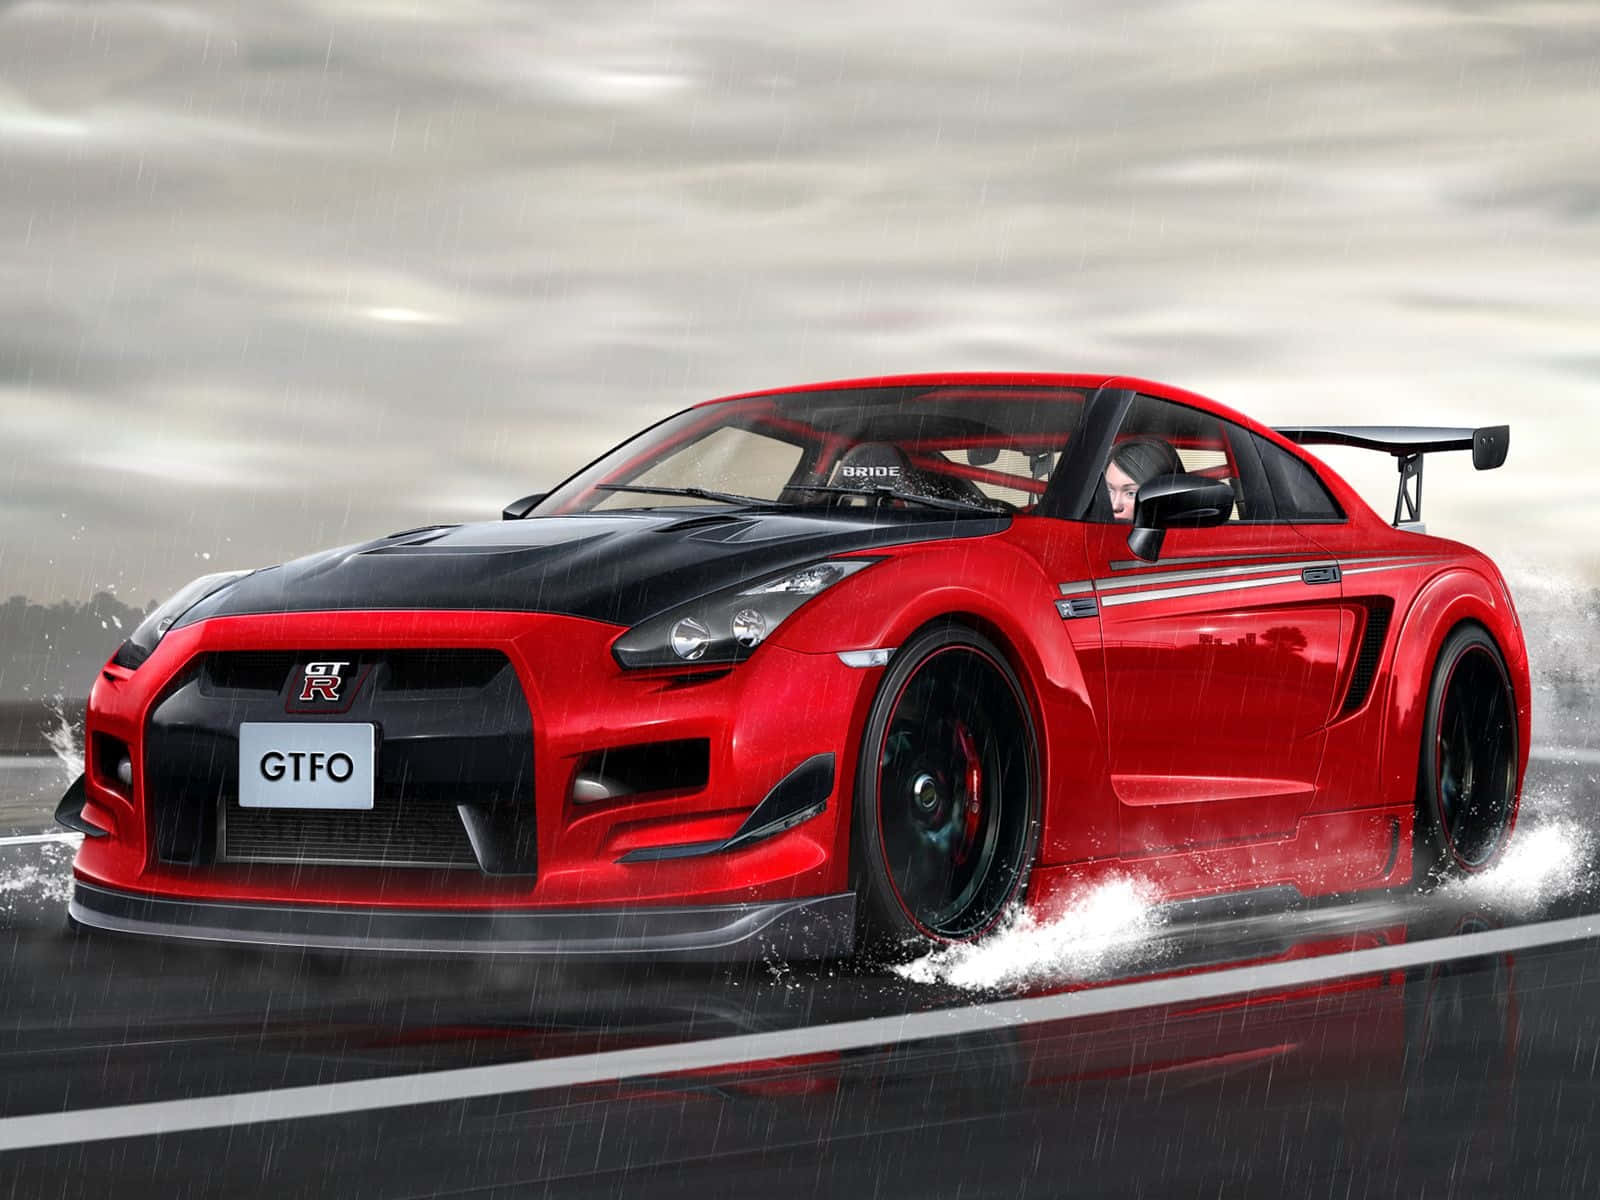 "Feel the thrill with this Cool GTR" Wallpaper